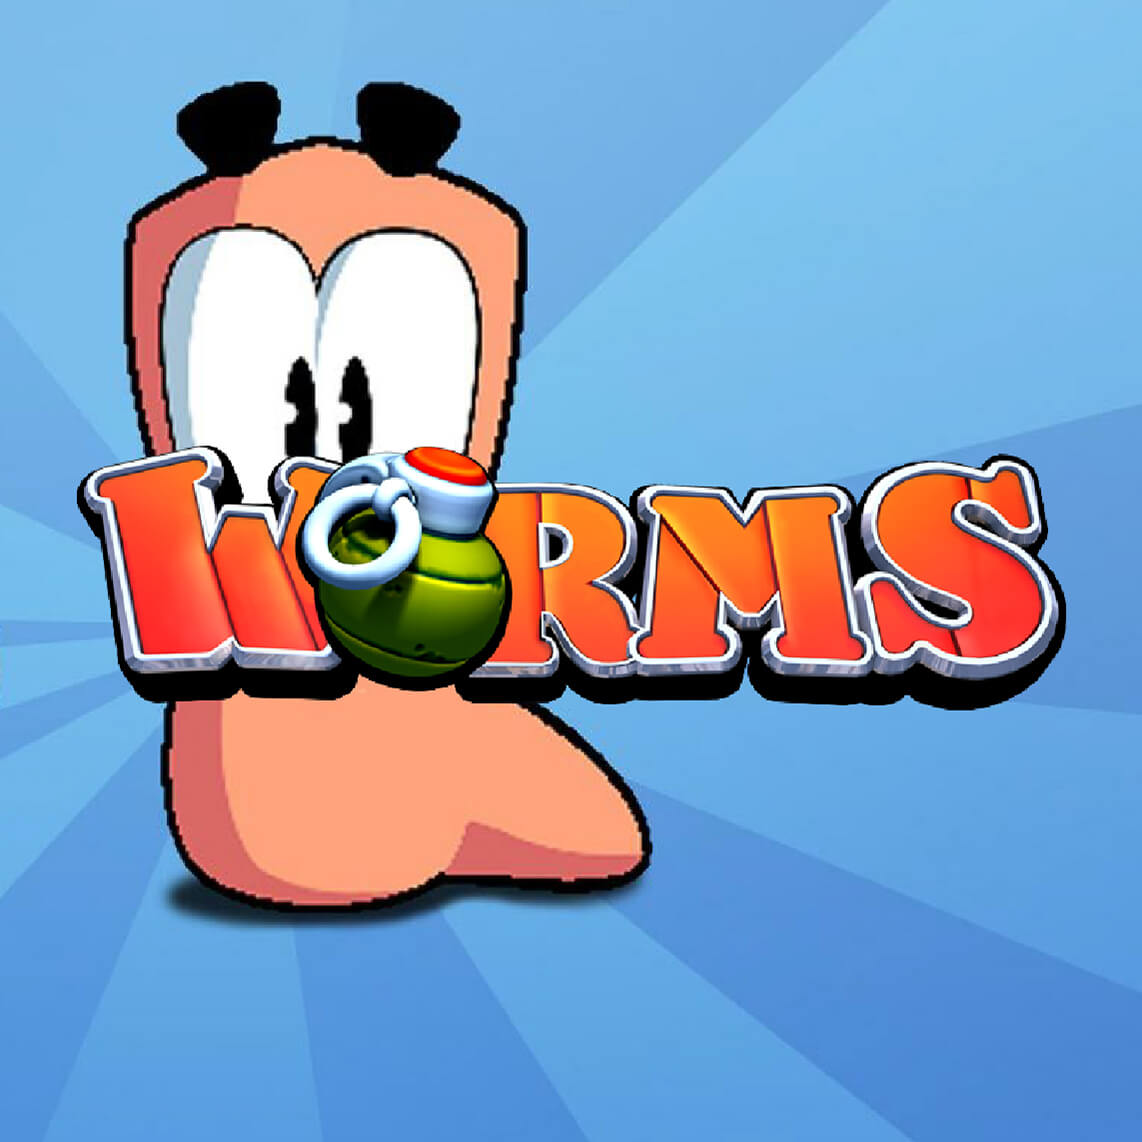 download xbox 360 worms games